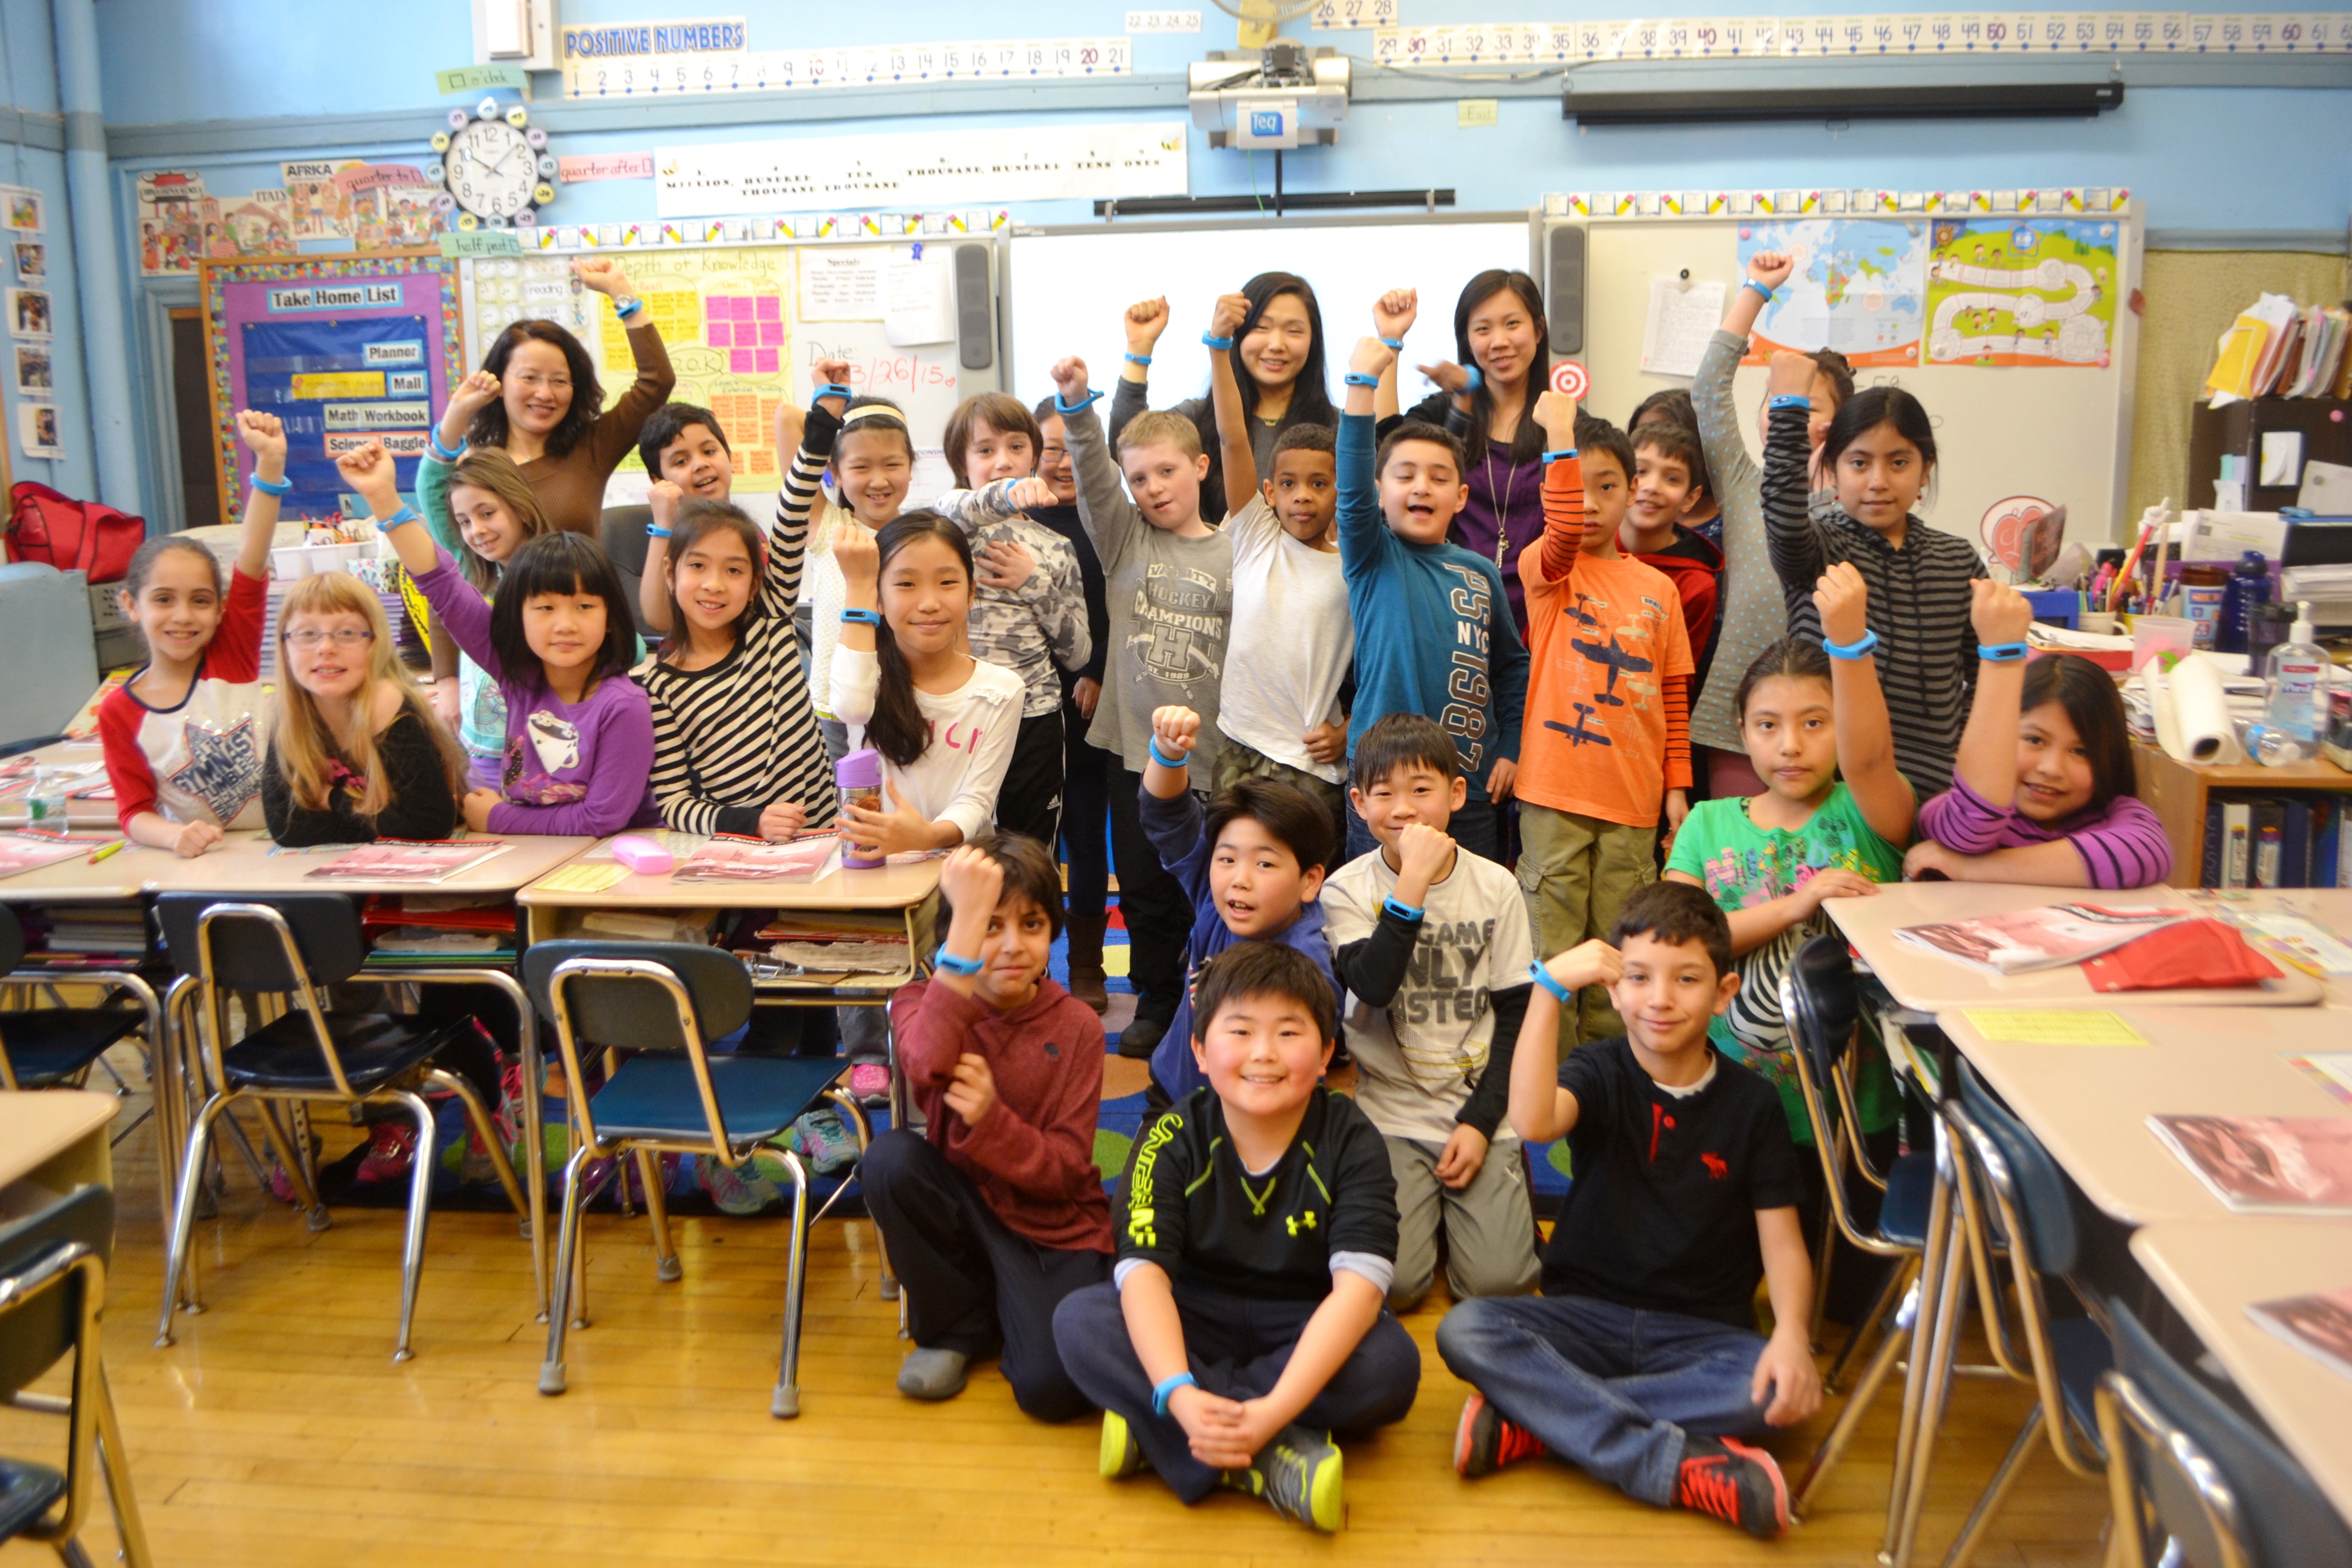 P.S. 41's Class 3205, taught by Cindy Wong and Helen Kim, won a trip to see the New York Knicks practice after totaling up 4,503,745 steps, equaling 769 food packets sent to children in Africa.